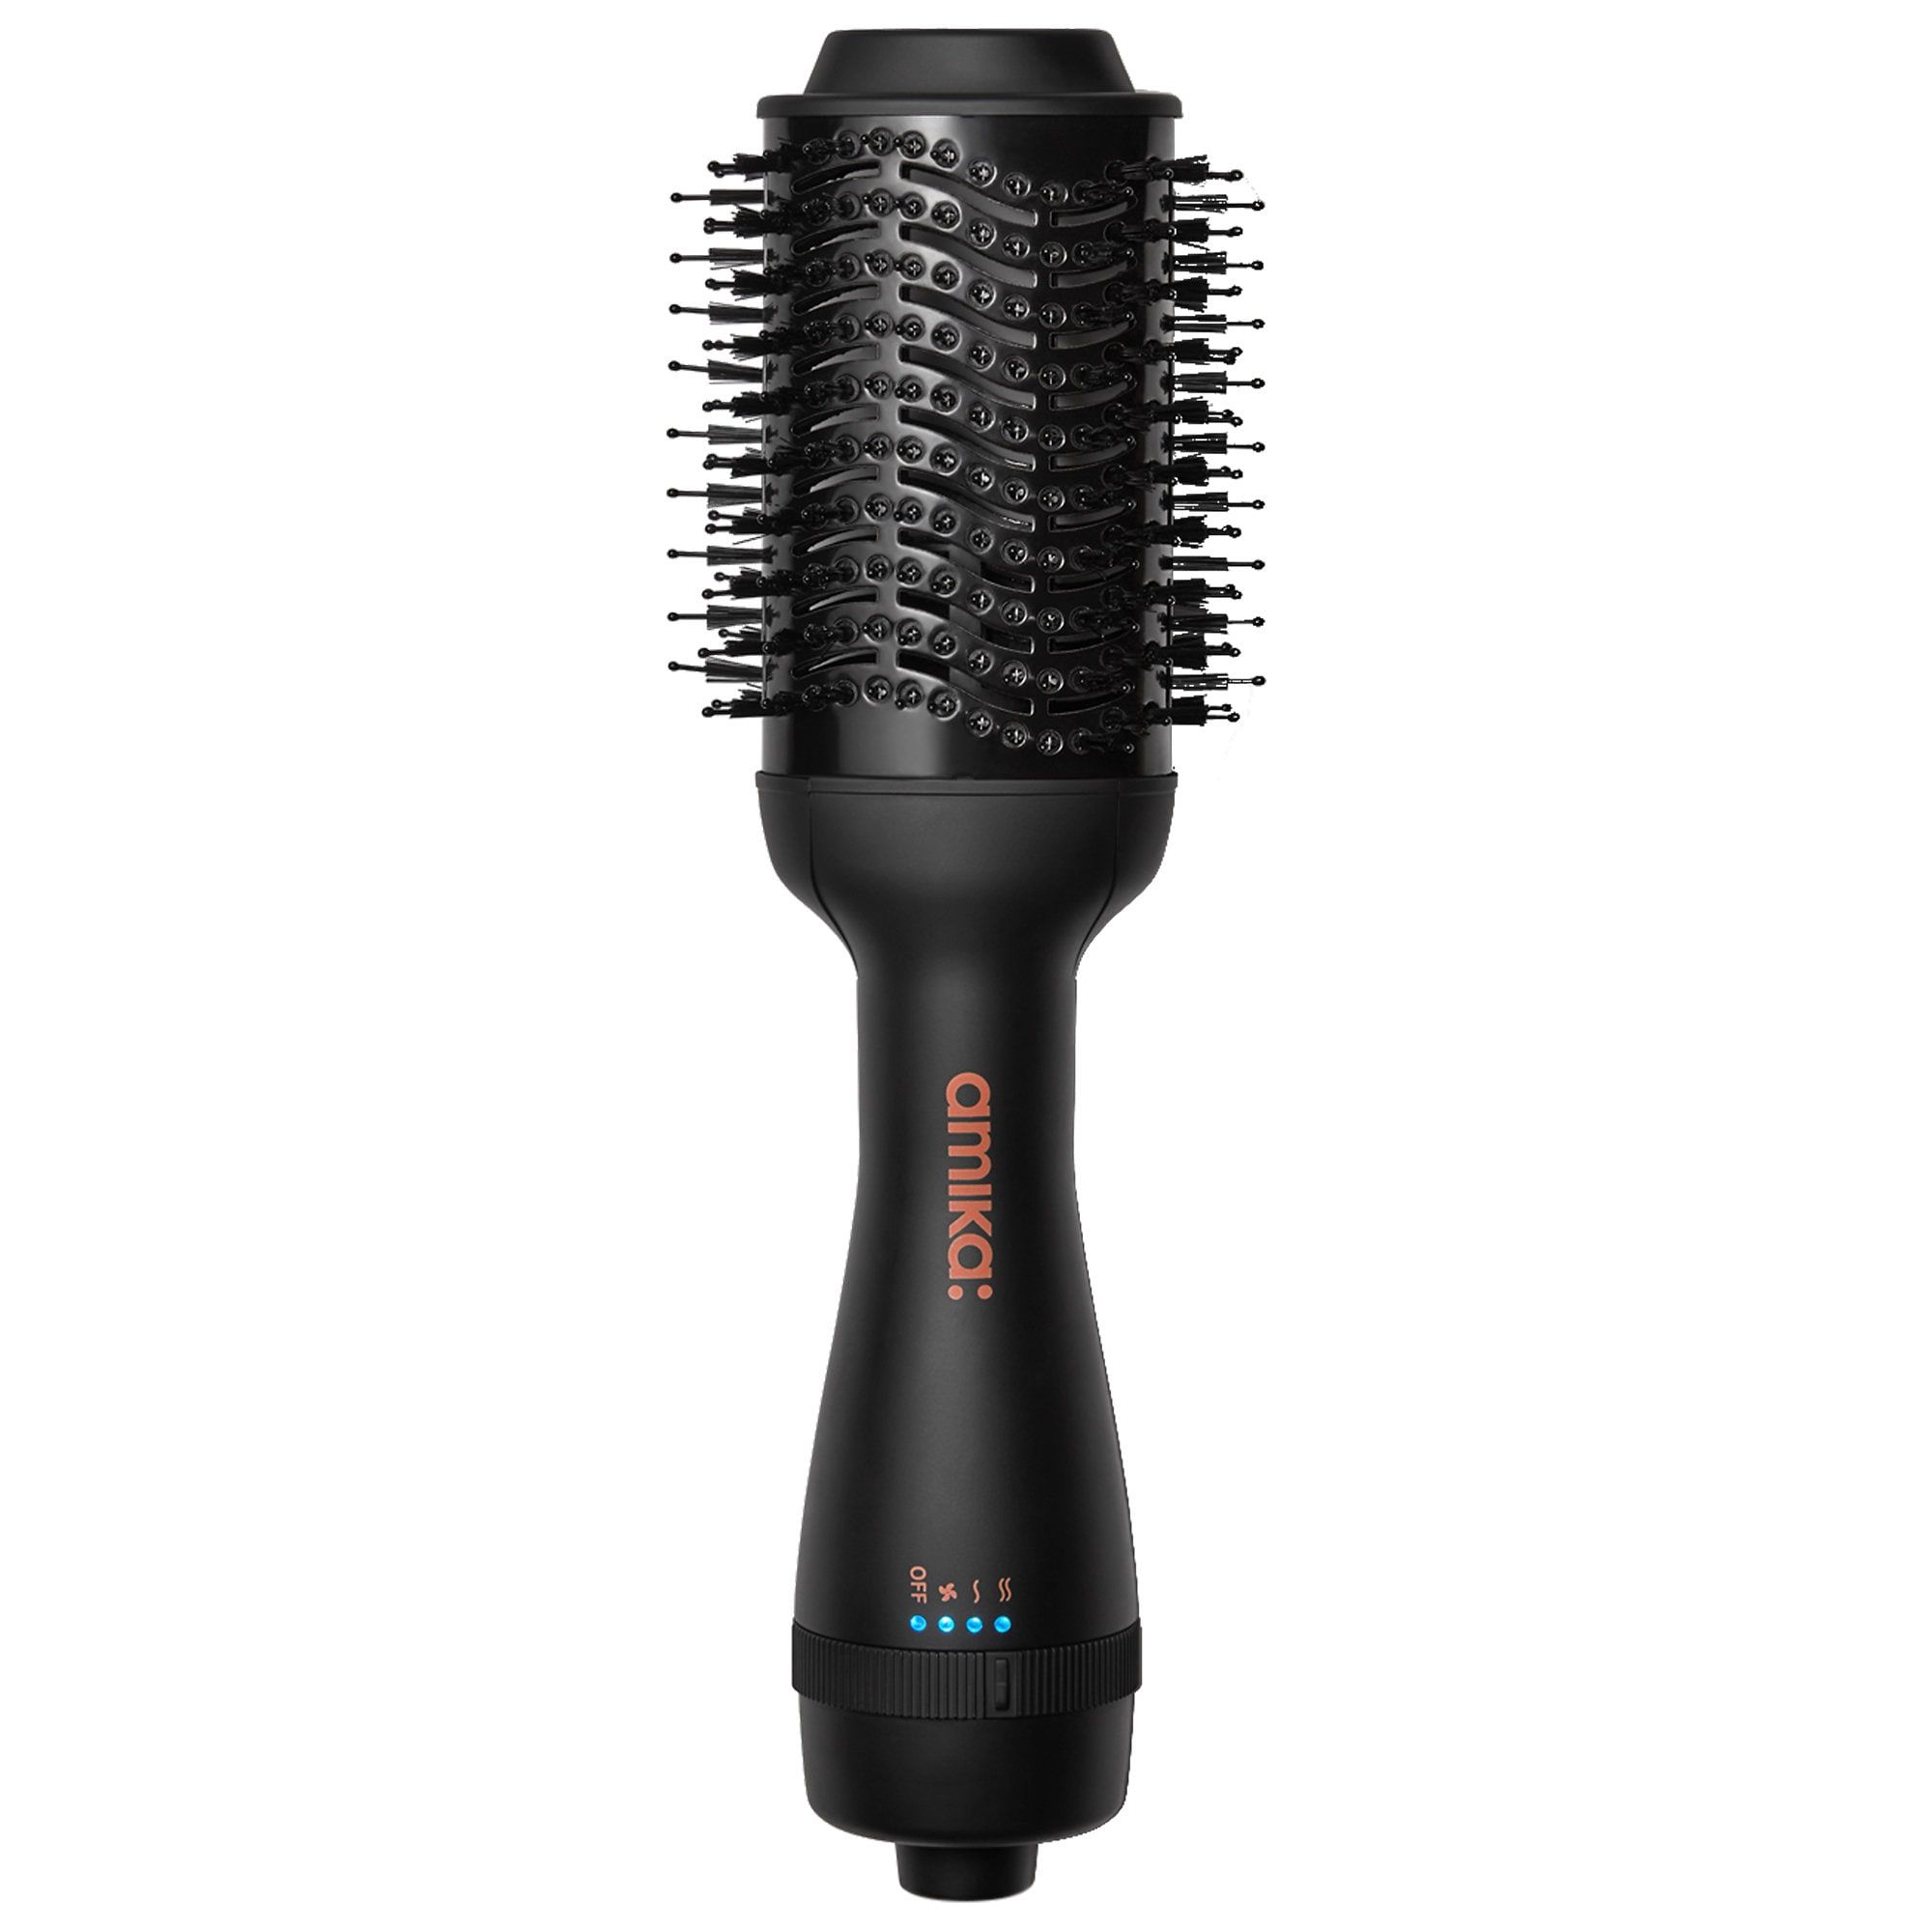 7 Best Hair Dryer Brushes of 2022 - Top Hot Air Brushes